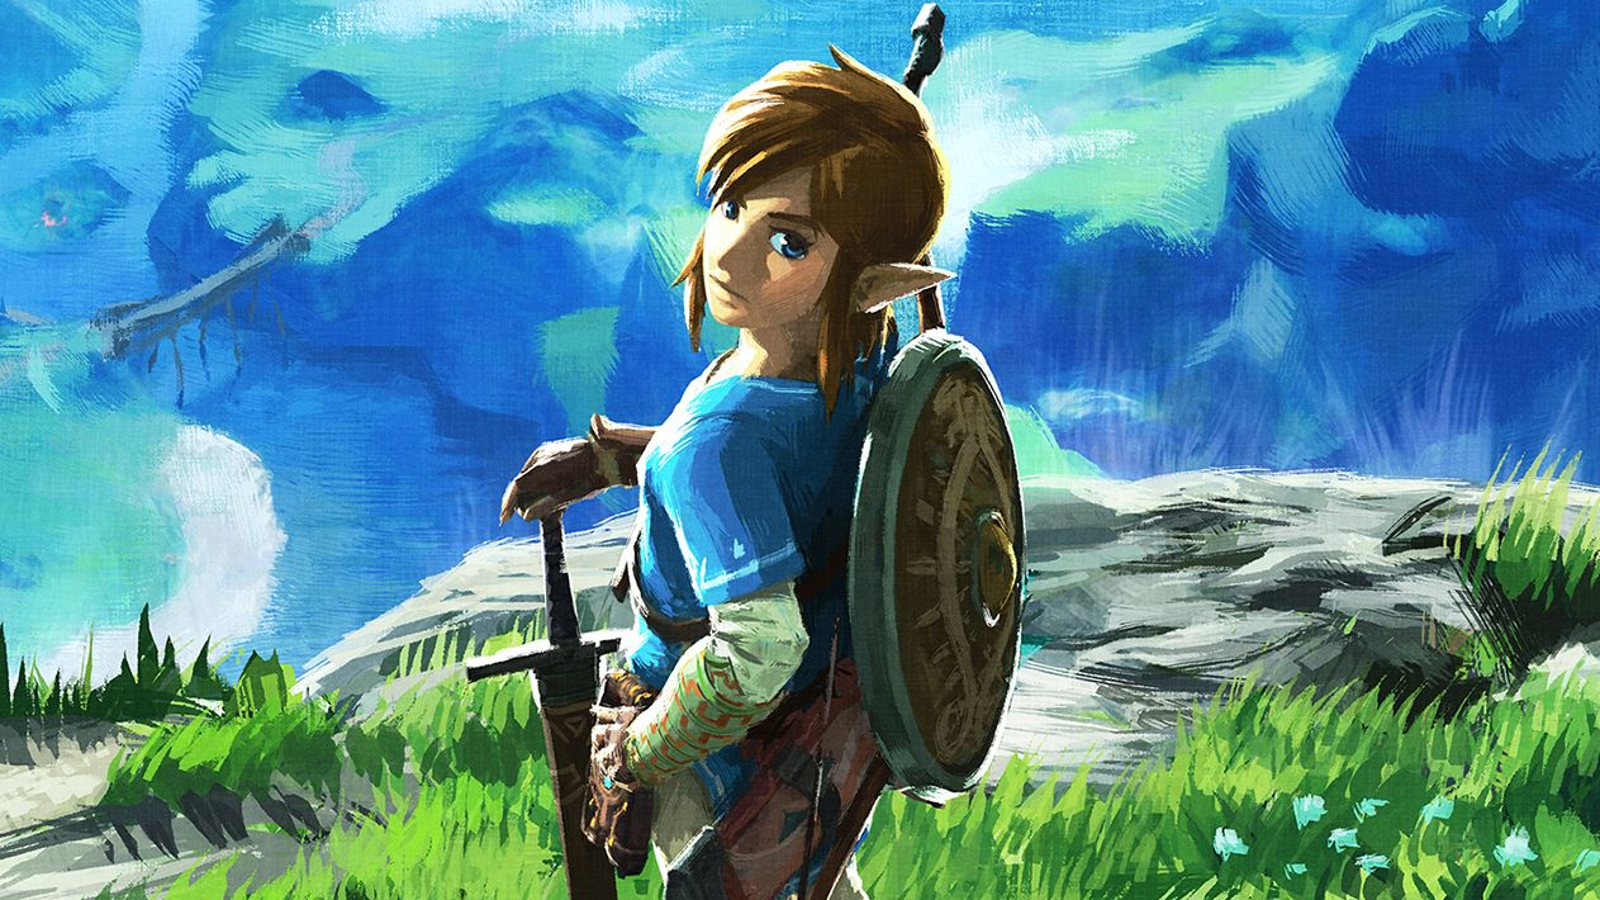 Have a look at The Legend of Zelda: Breath of the Wild - Master and Special  Editions